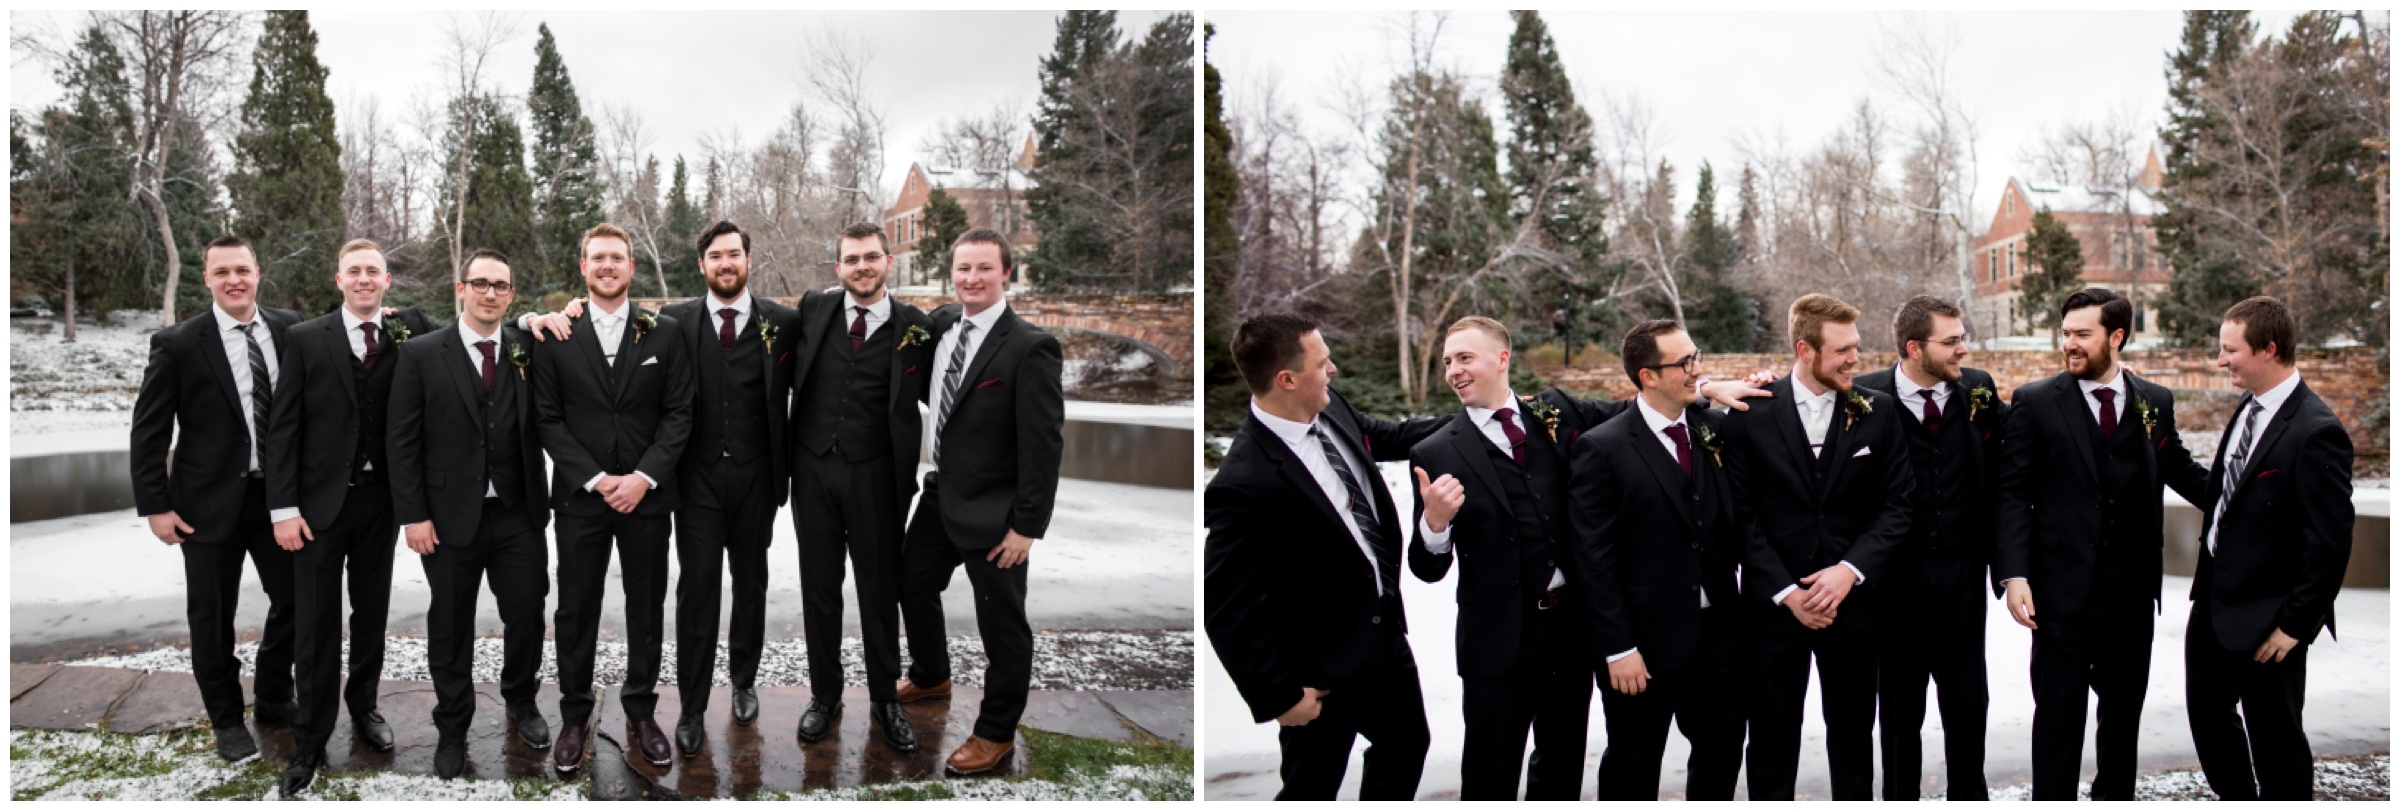 groom and groomsmen photos in the snow by Colorado photographer Plum Pretty Photo 